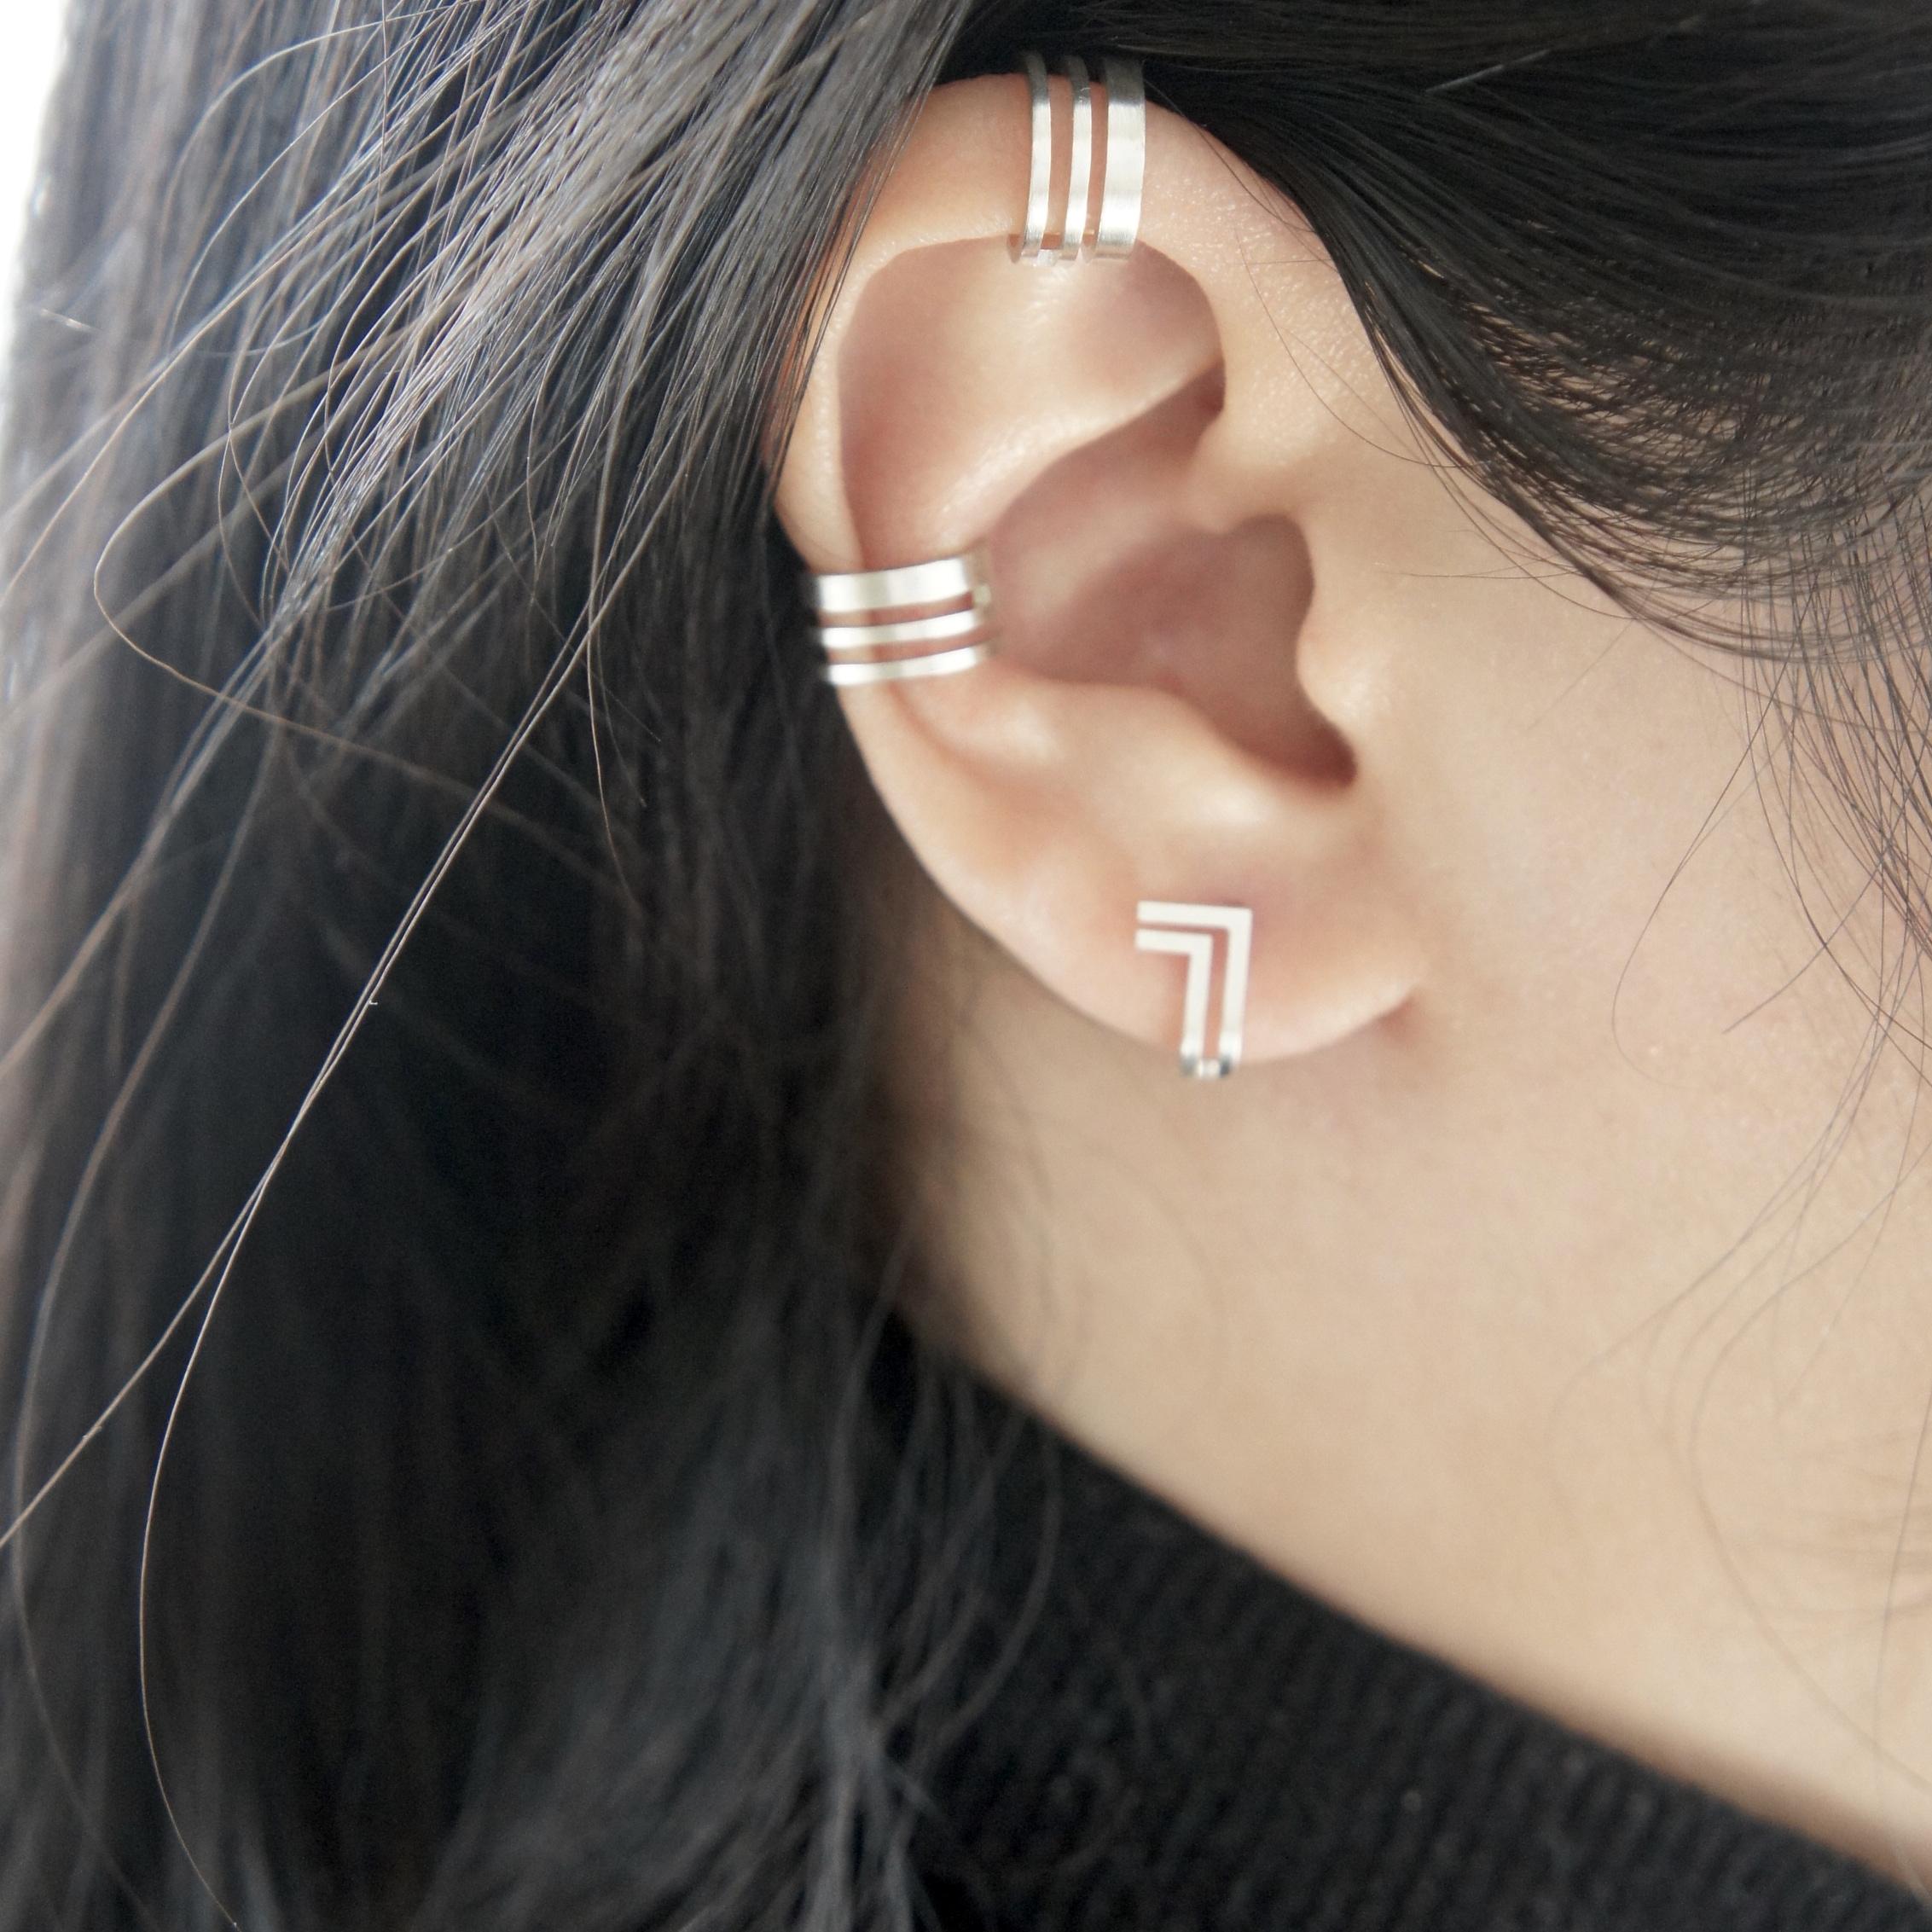 Unfinishing Line collection exudes minimalism and precision with its smooth lines and angles. Detail with a curved structure and cut out details. Lines Earcuff is perfect for day to night wear due to the simplistic neat design which can be paired